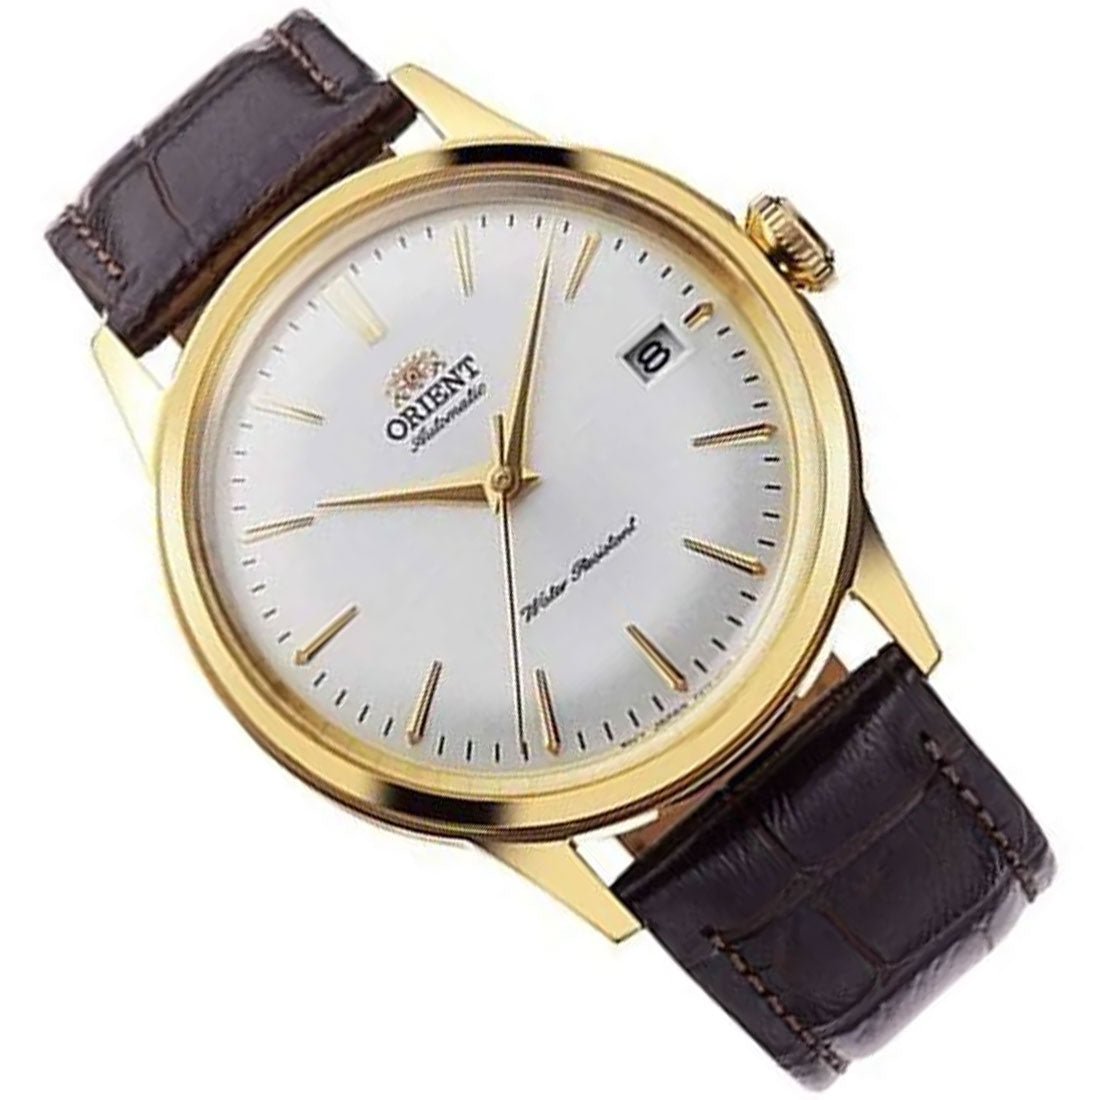 Orient Classic Bambino White Dial Leather RA-AC0M01S RA-AC0M01S10B Watch -Orient